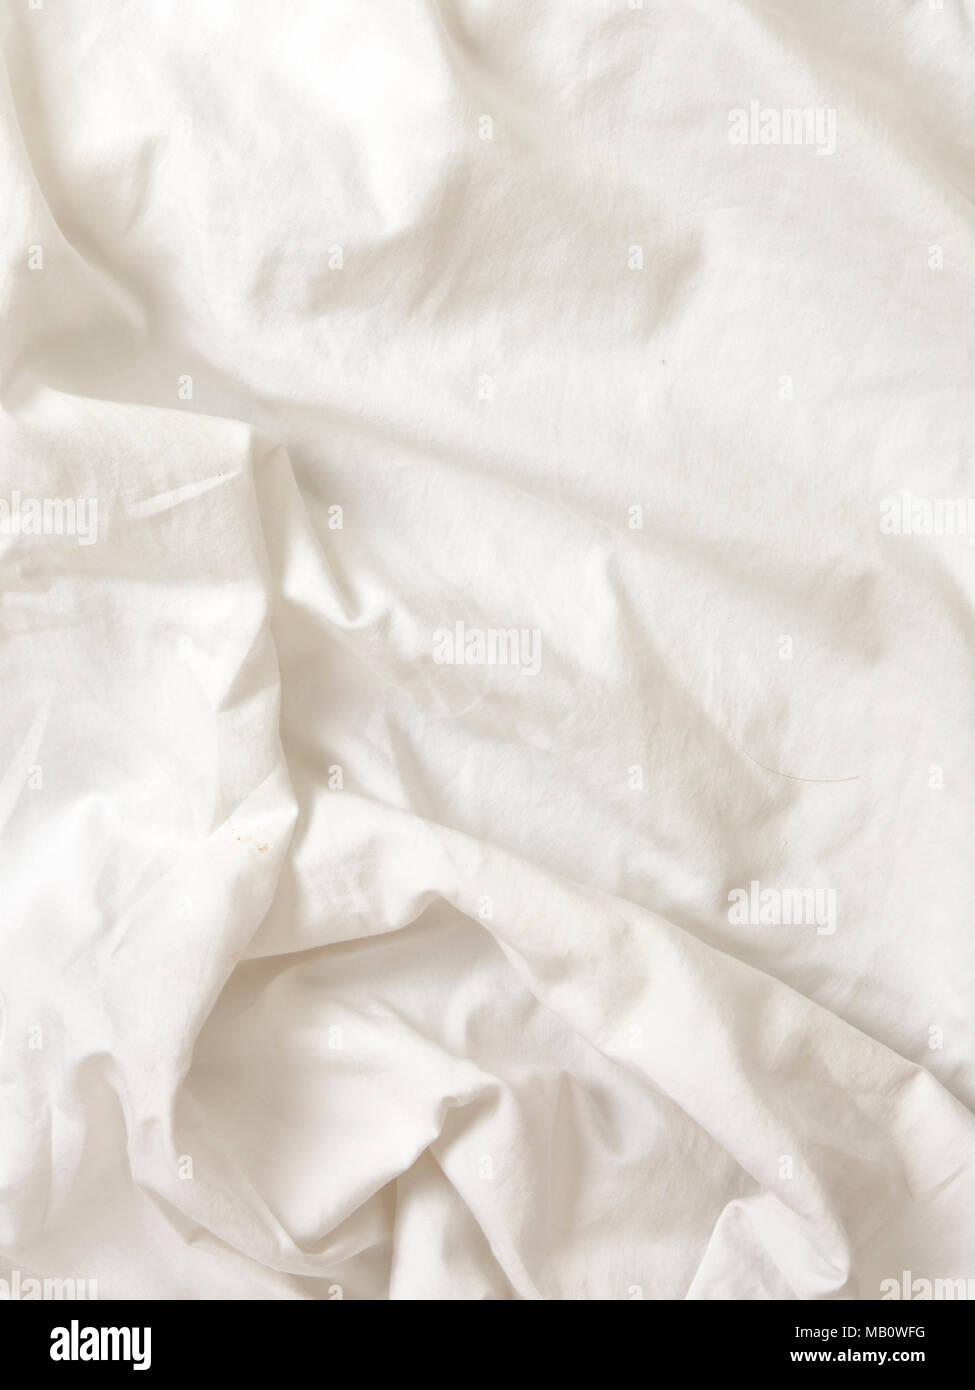 White wrinkled cotton fabric bed sheets textured background Stock Photo -  Alamy